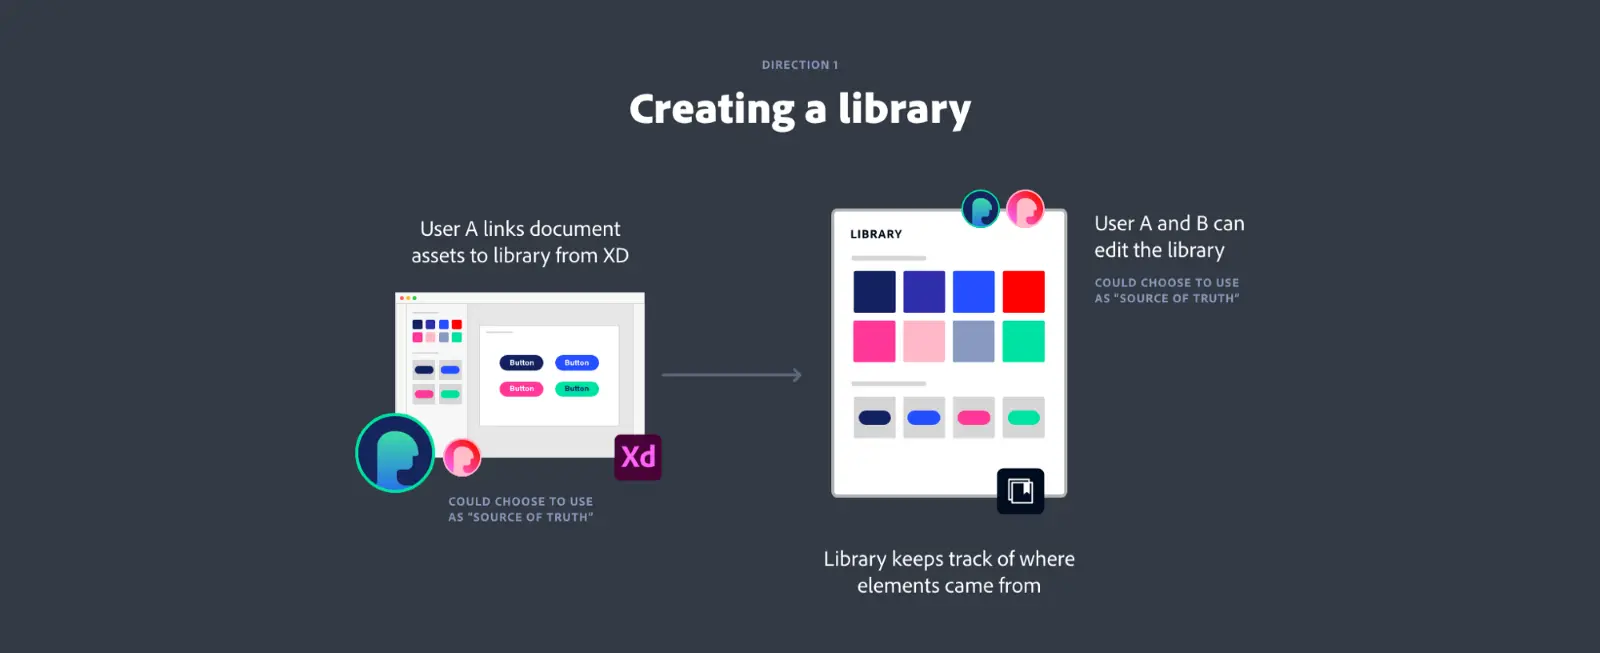 Diagram shows User A linking document assets to a library from Adobe XD enabling User A and User B to edit the library.